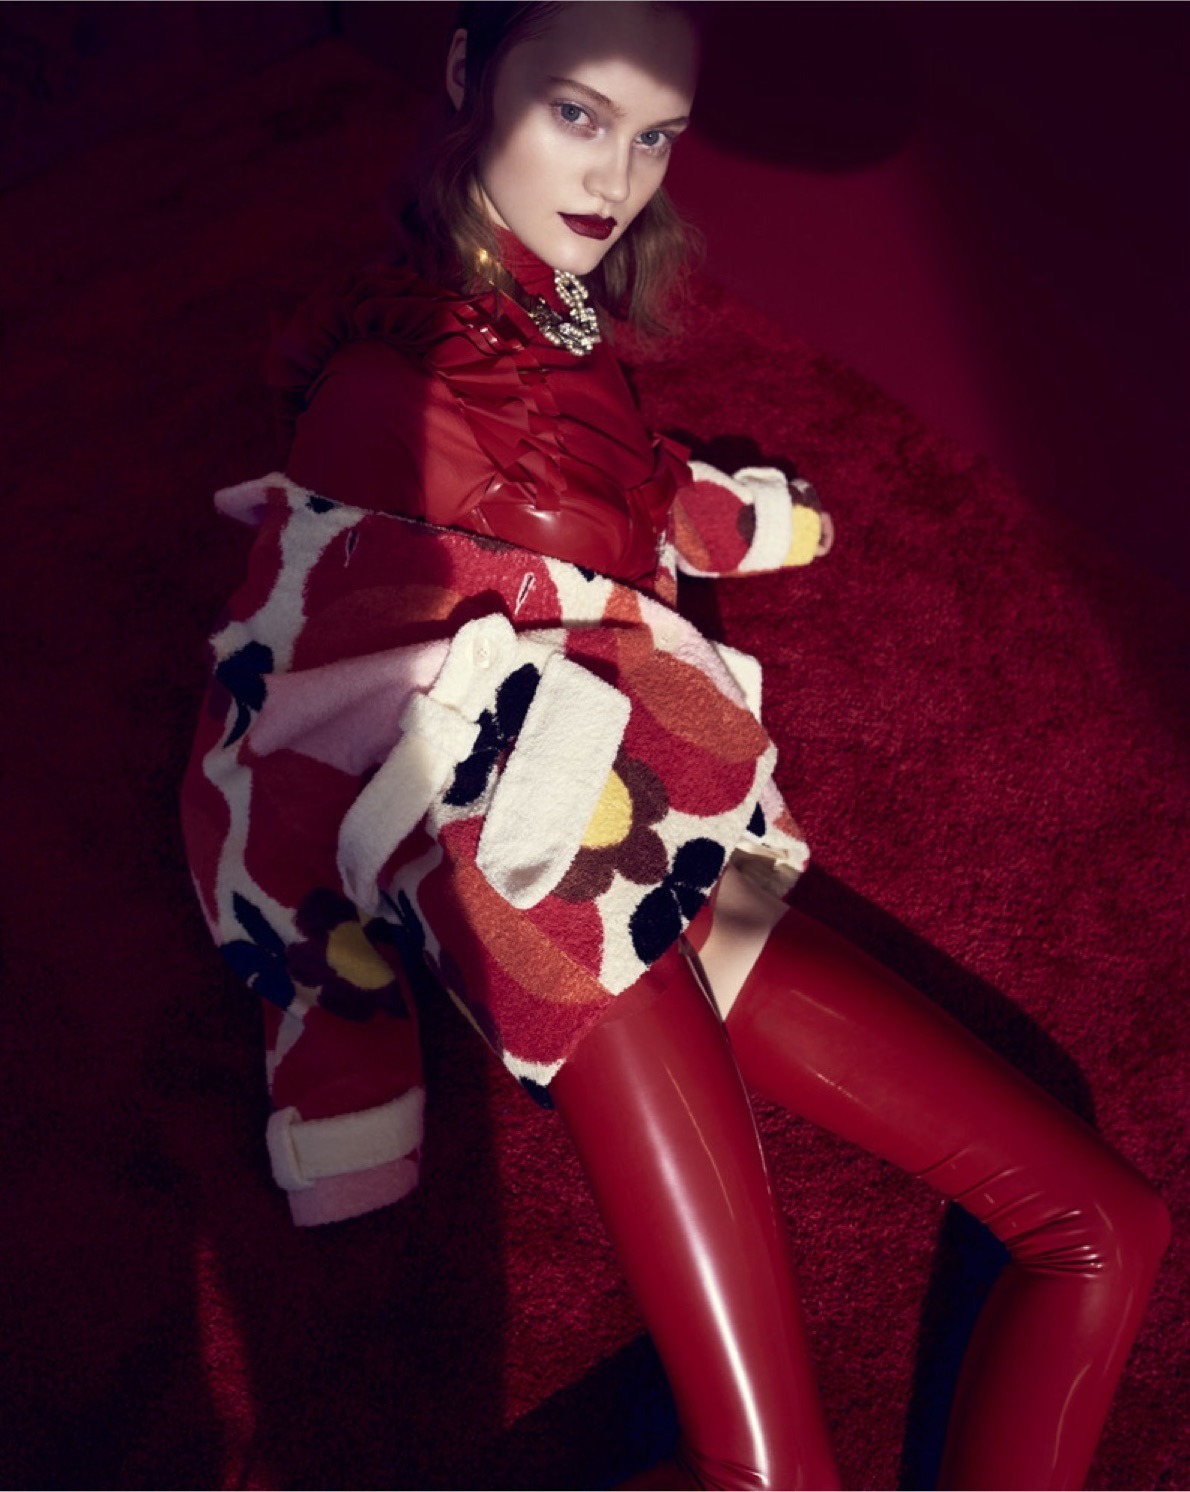 Foxies Poison Vogue.it 13 by Andreas ORTNER